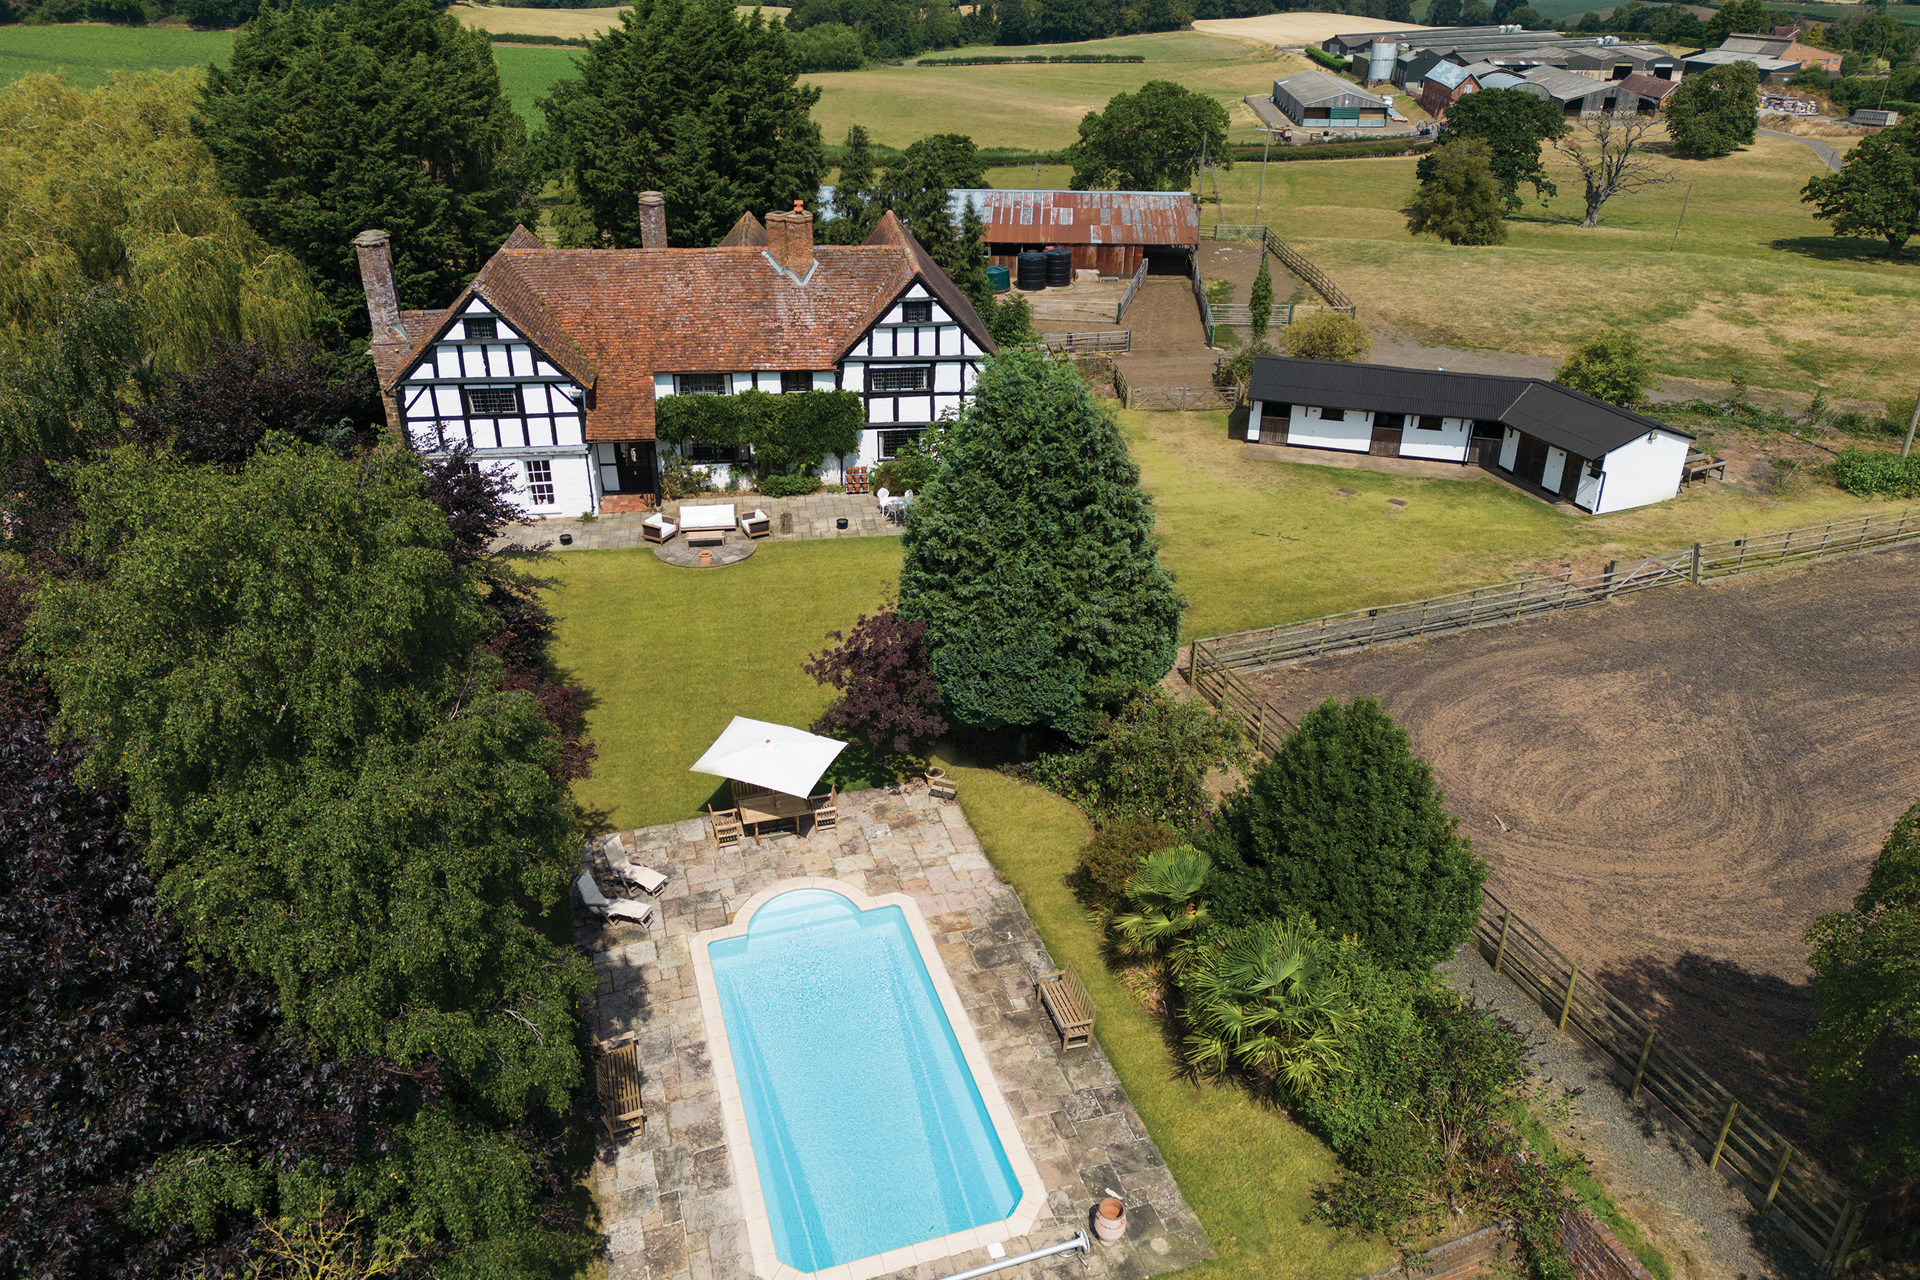 Aerial view of tudor-style farmhouse with fields surrounding and an outdoor swimming pool.